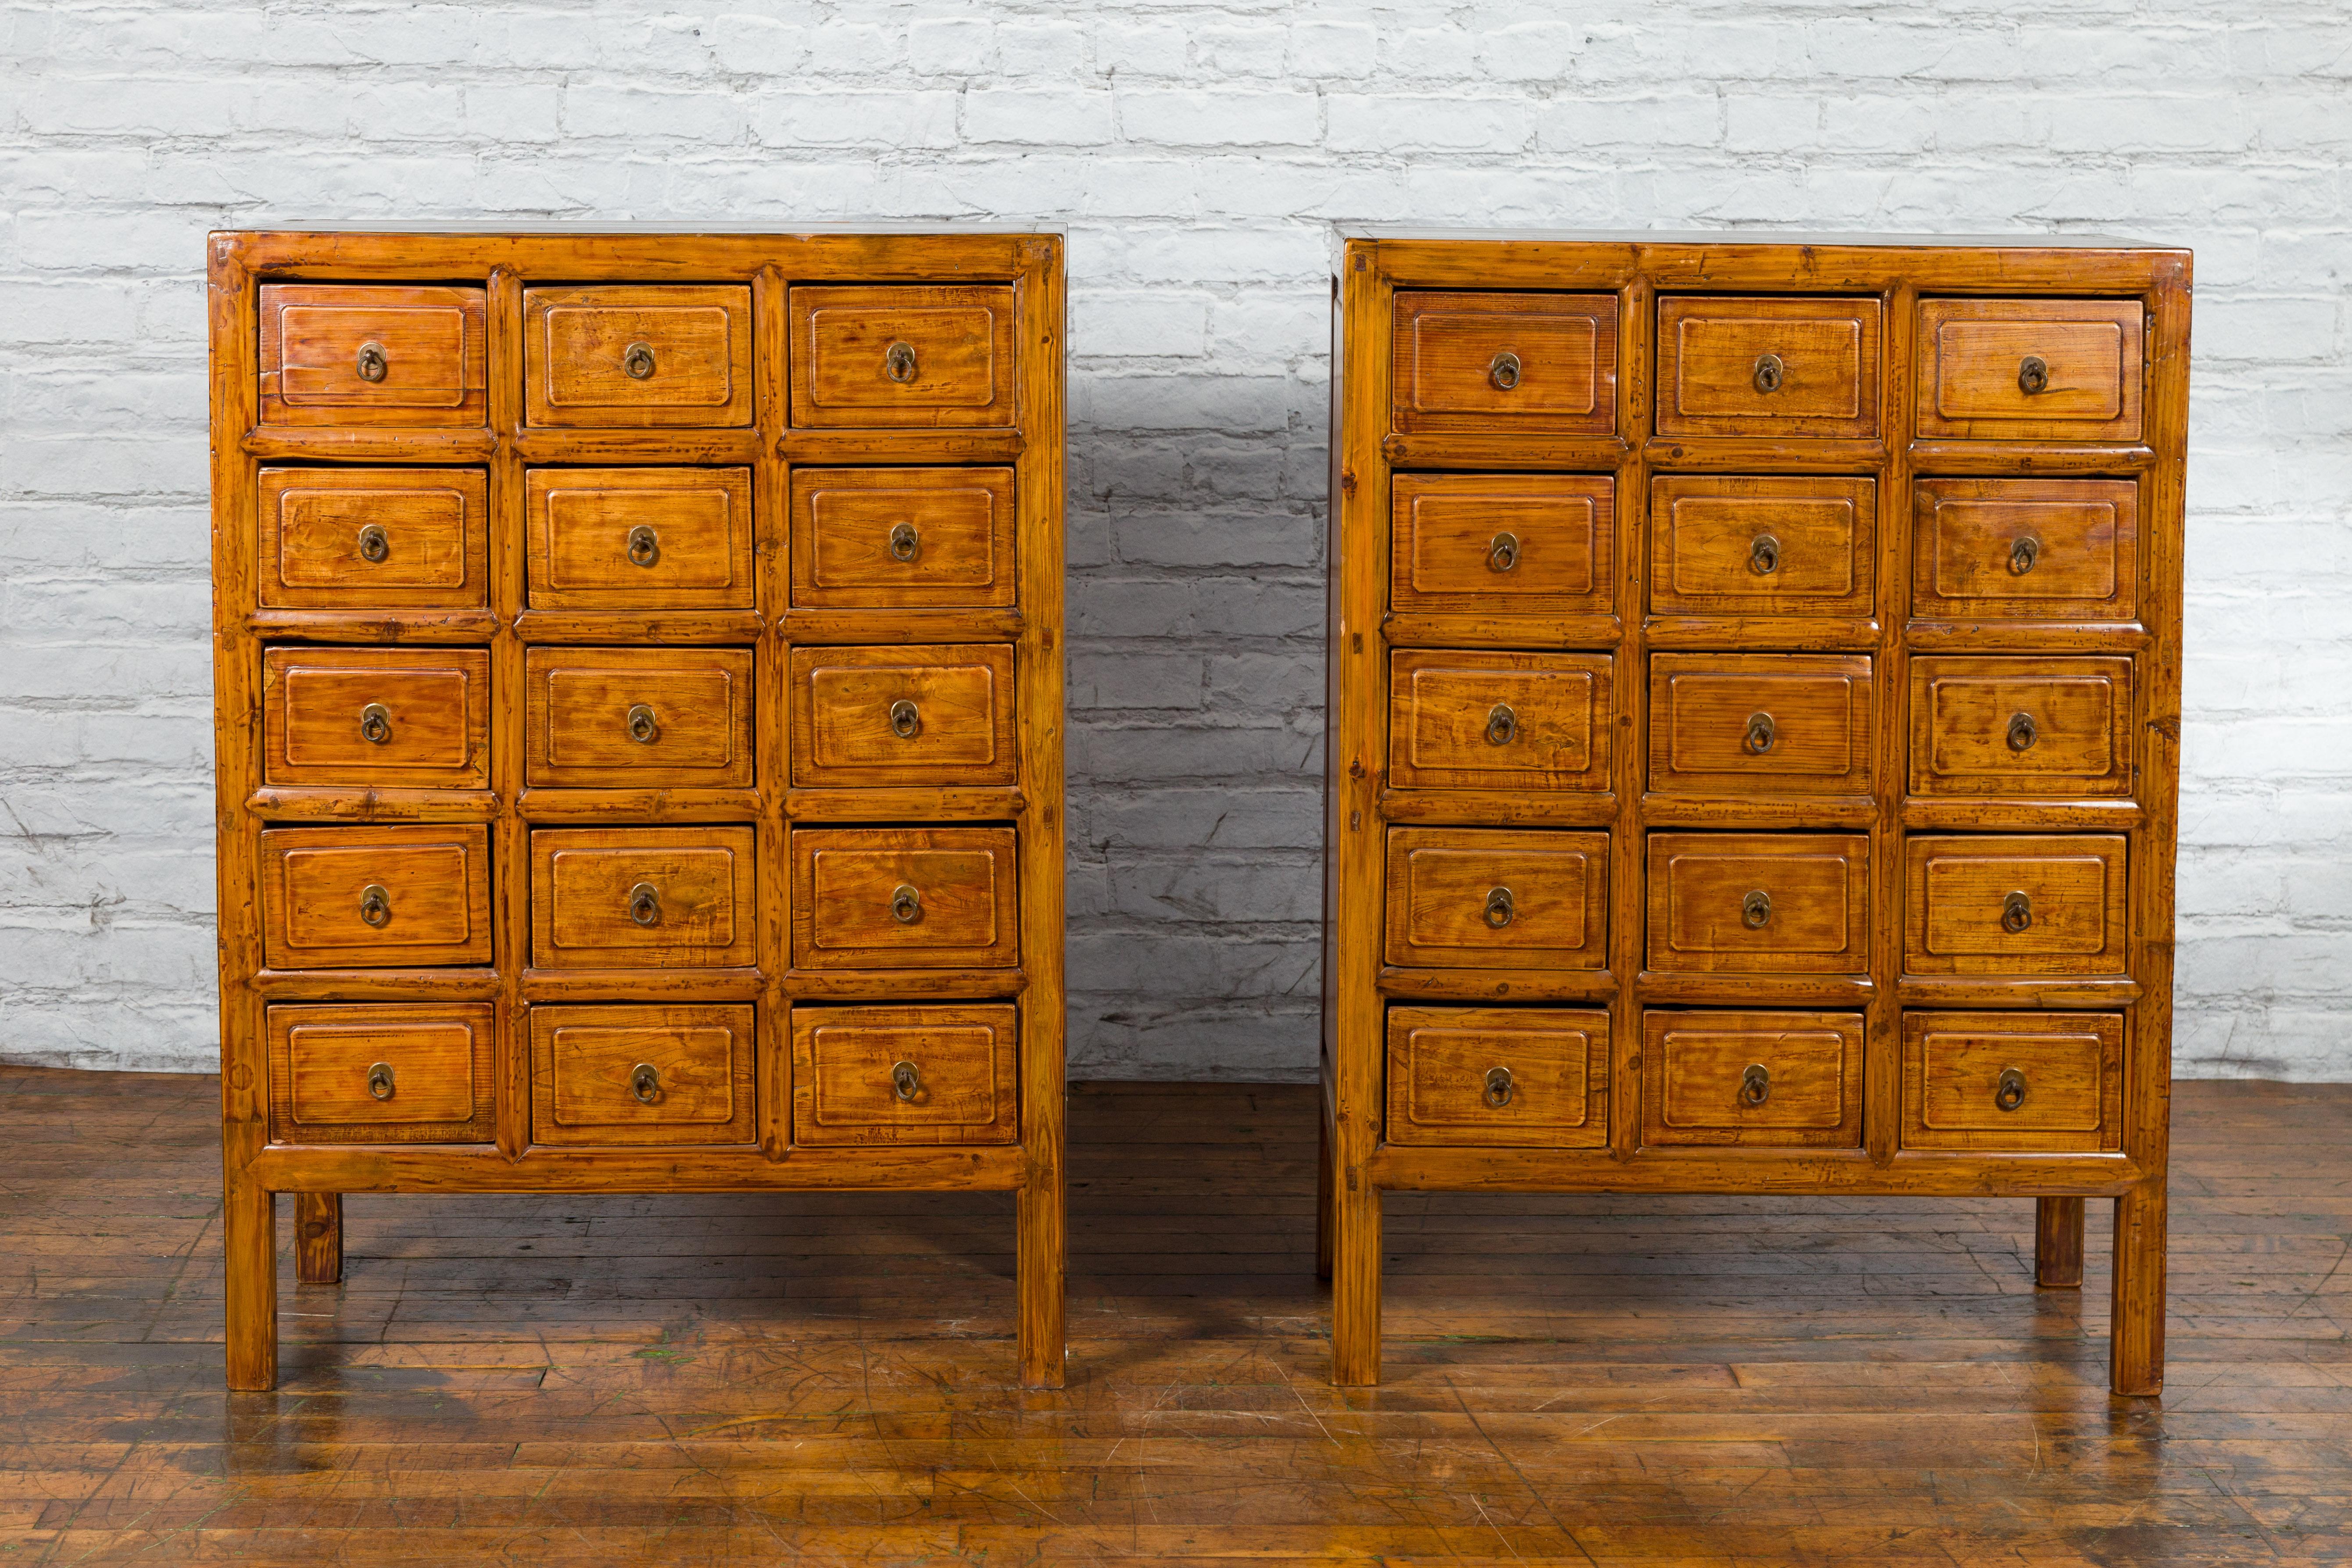 Carved Chinese Early 20th Century Apothecary Cabinet with 15 Drawers and Brown Patina